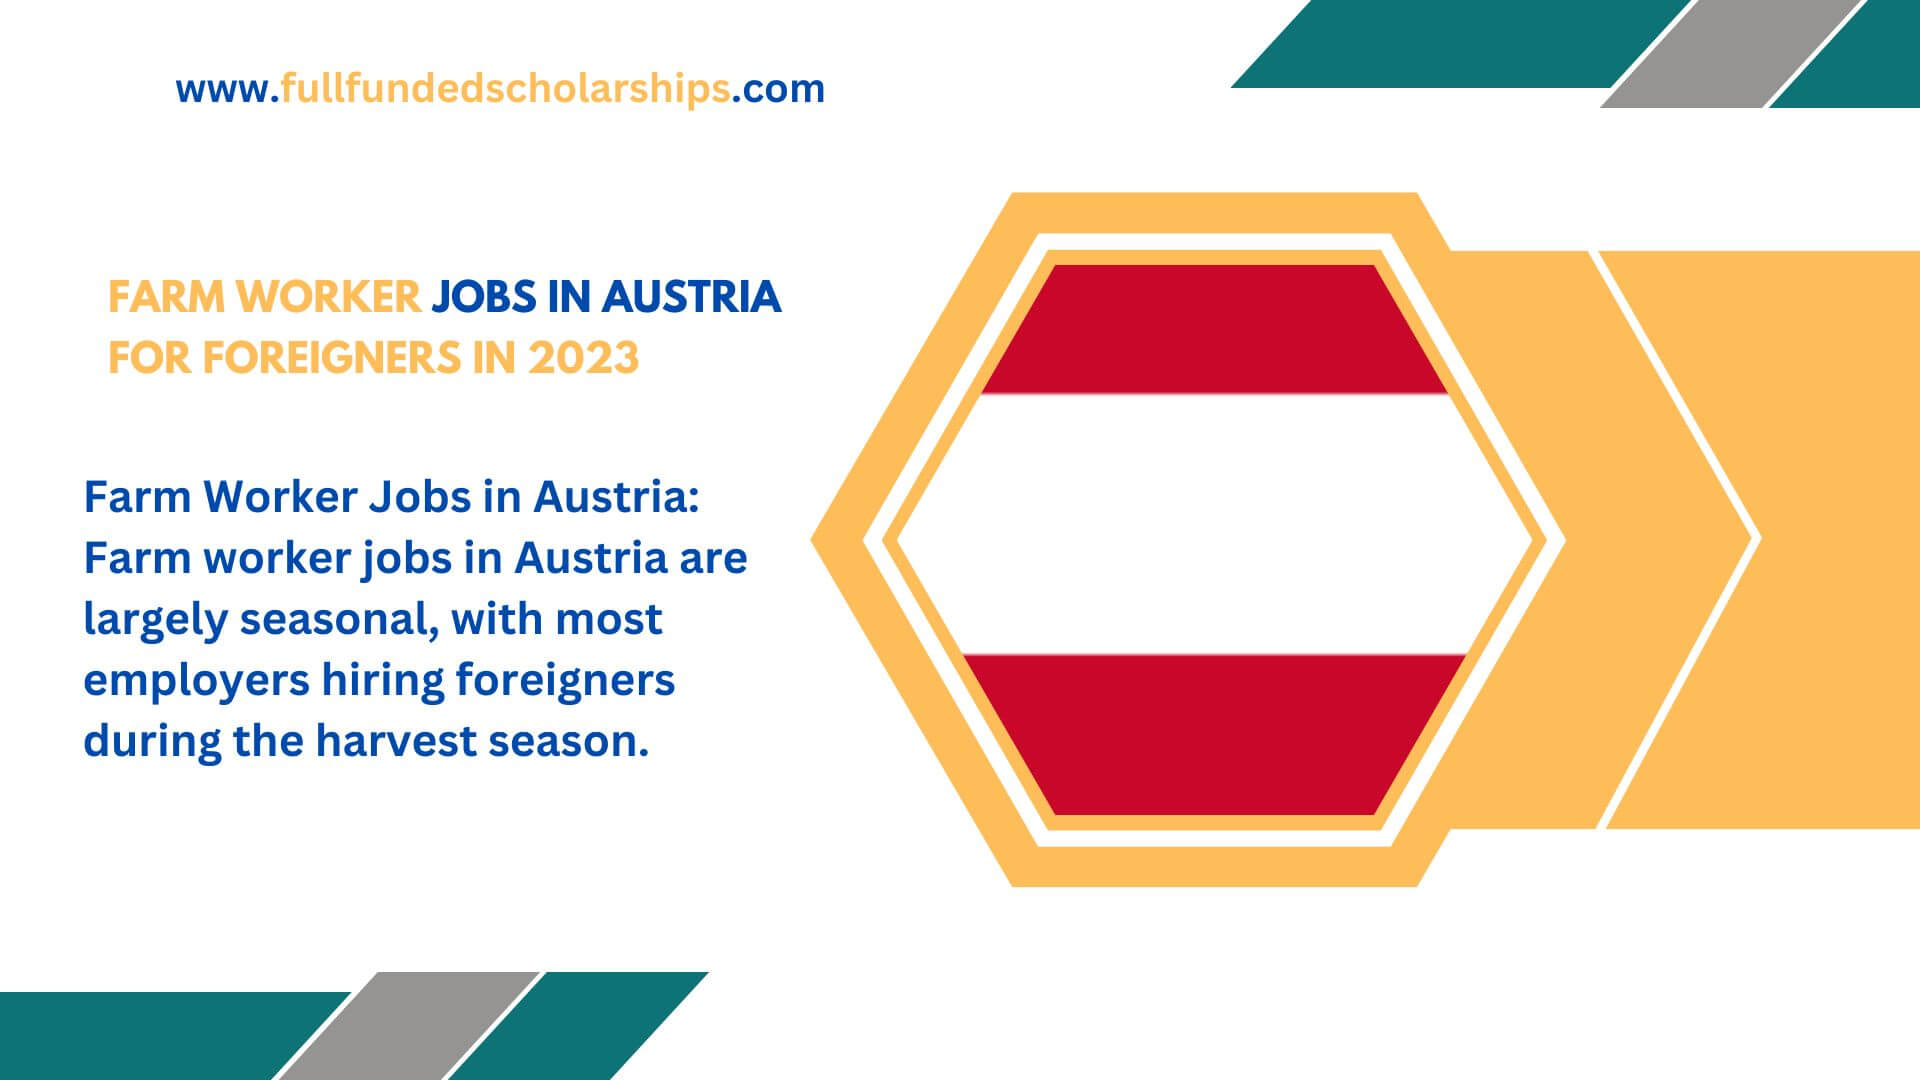 Farm Worker Jobs in Austria for Foreigners in 2023